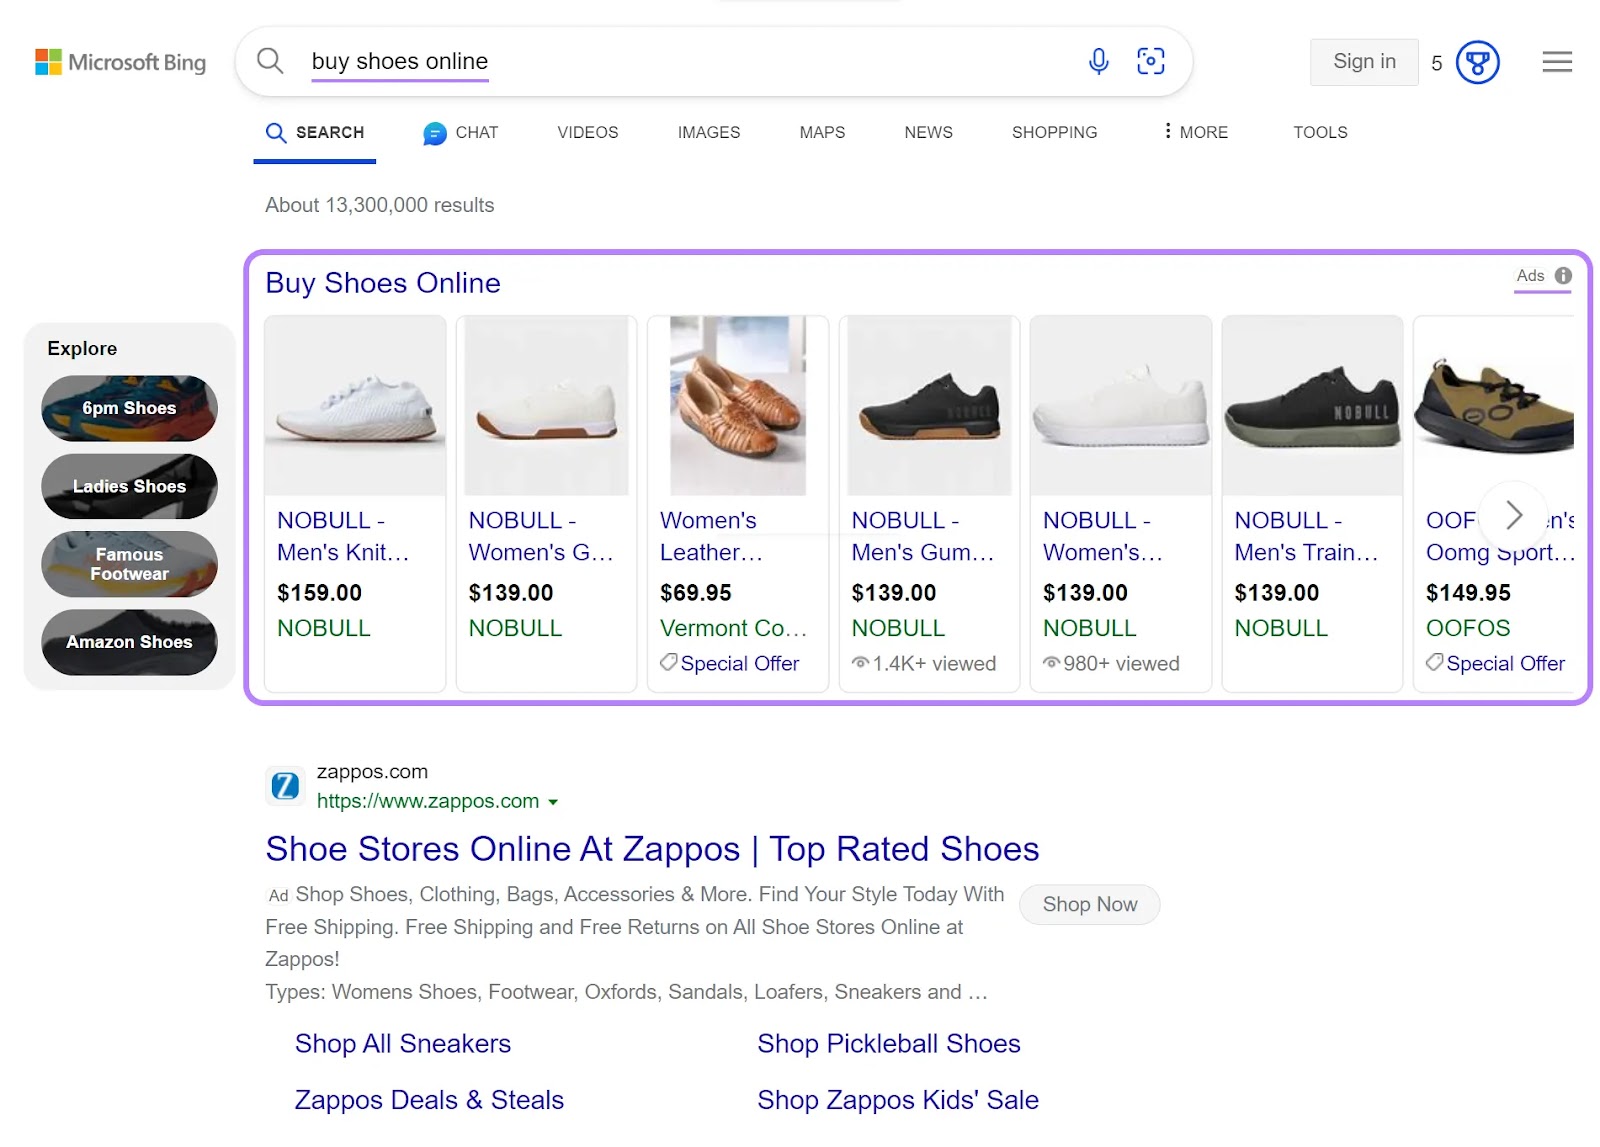 Product listing ads on Bing for "buy shoes online" query